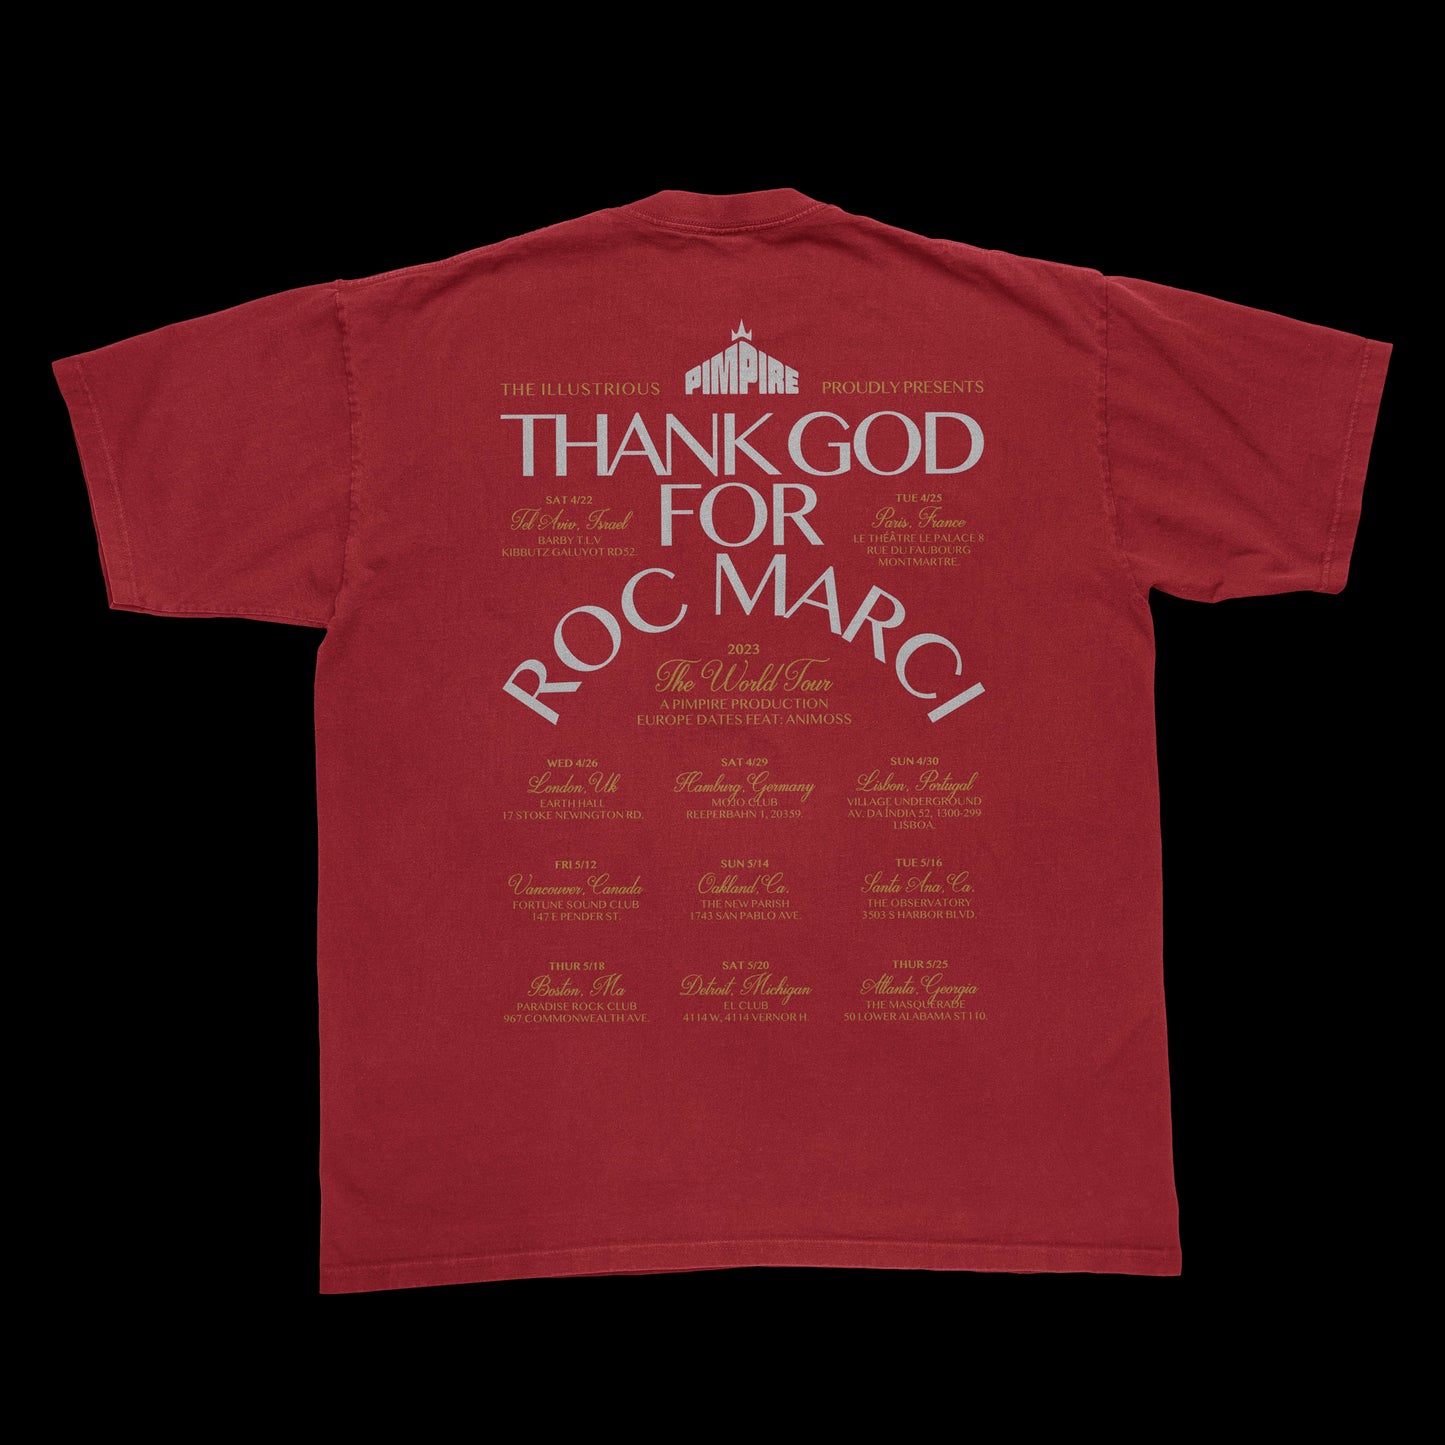 Thank God For Roc Marci Tour (Red T-Shirt)